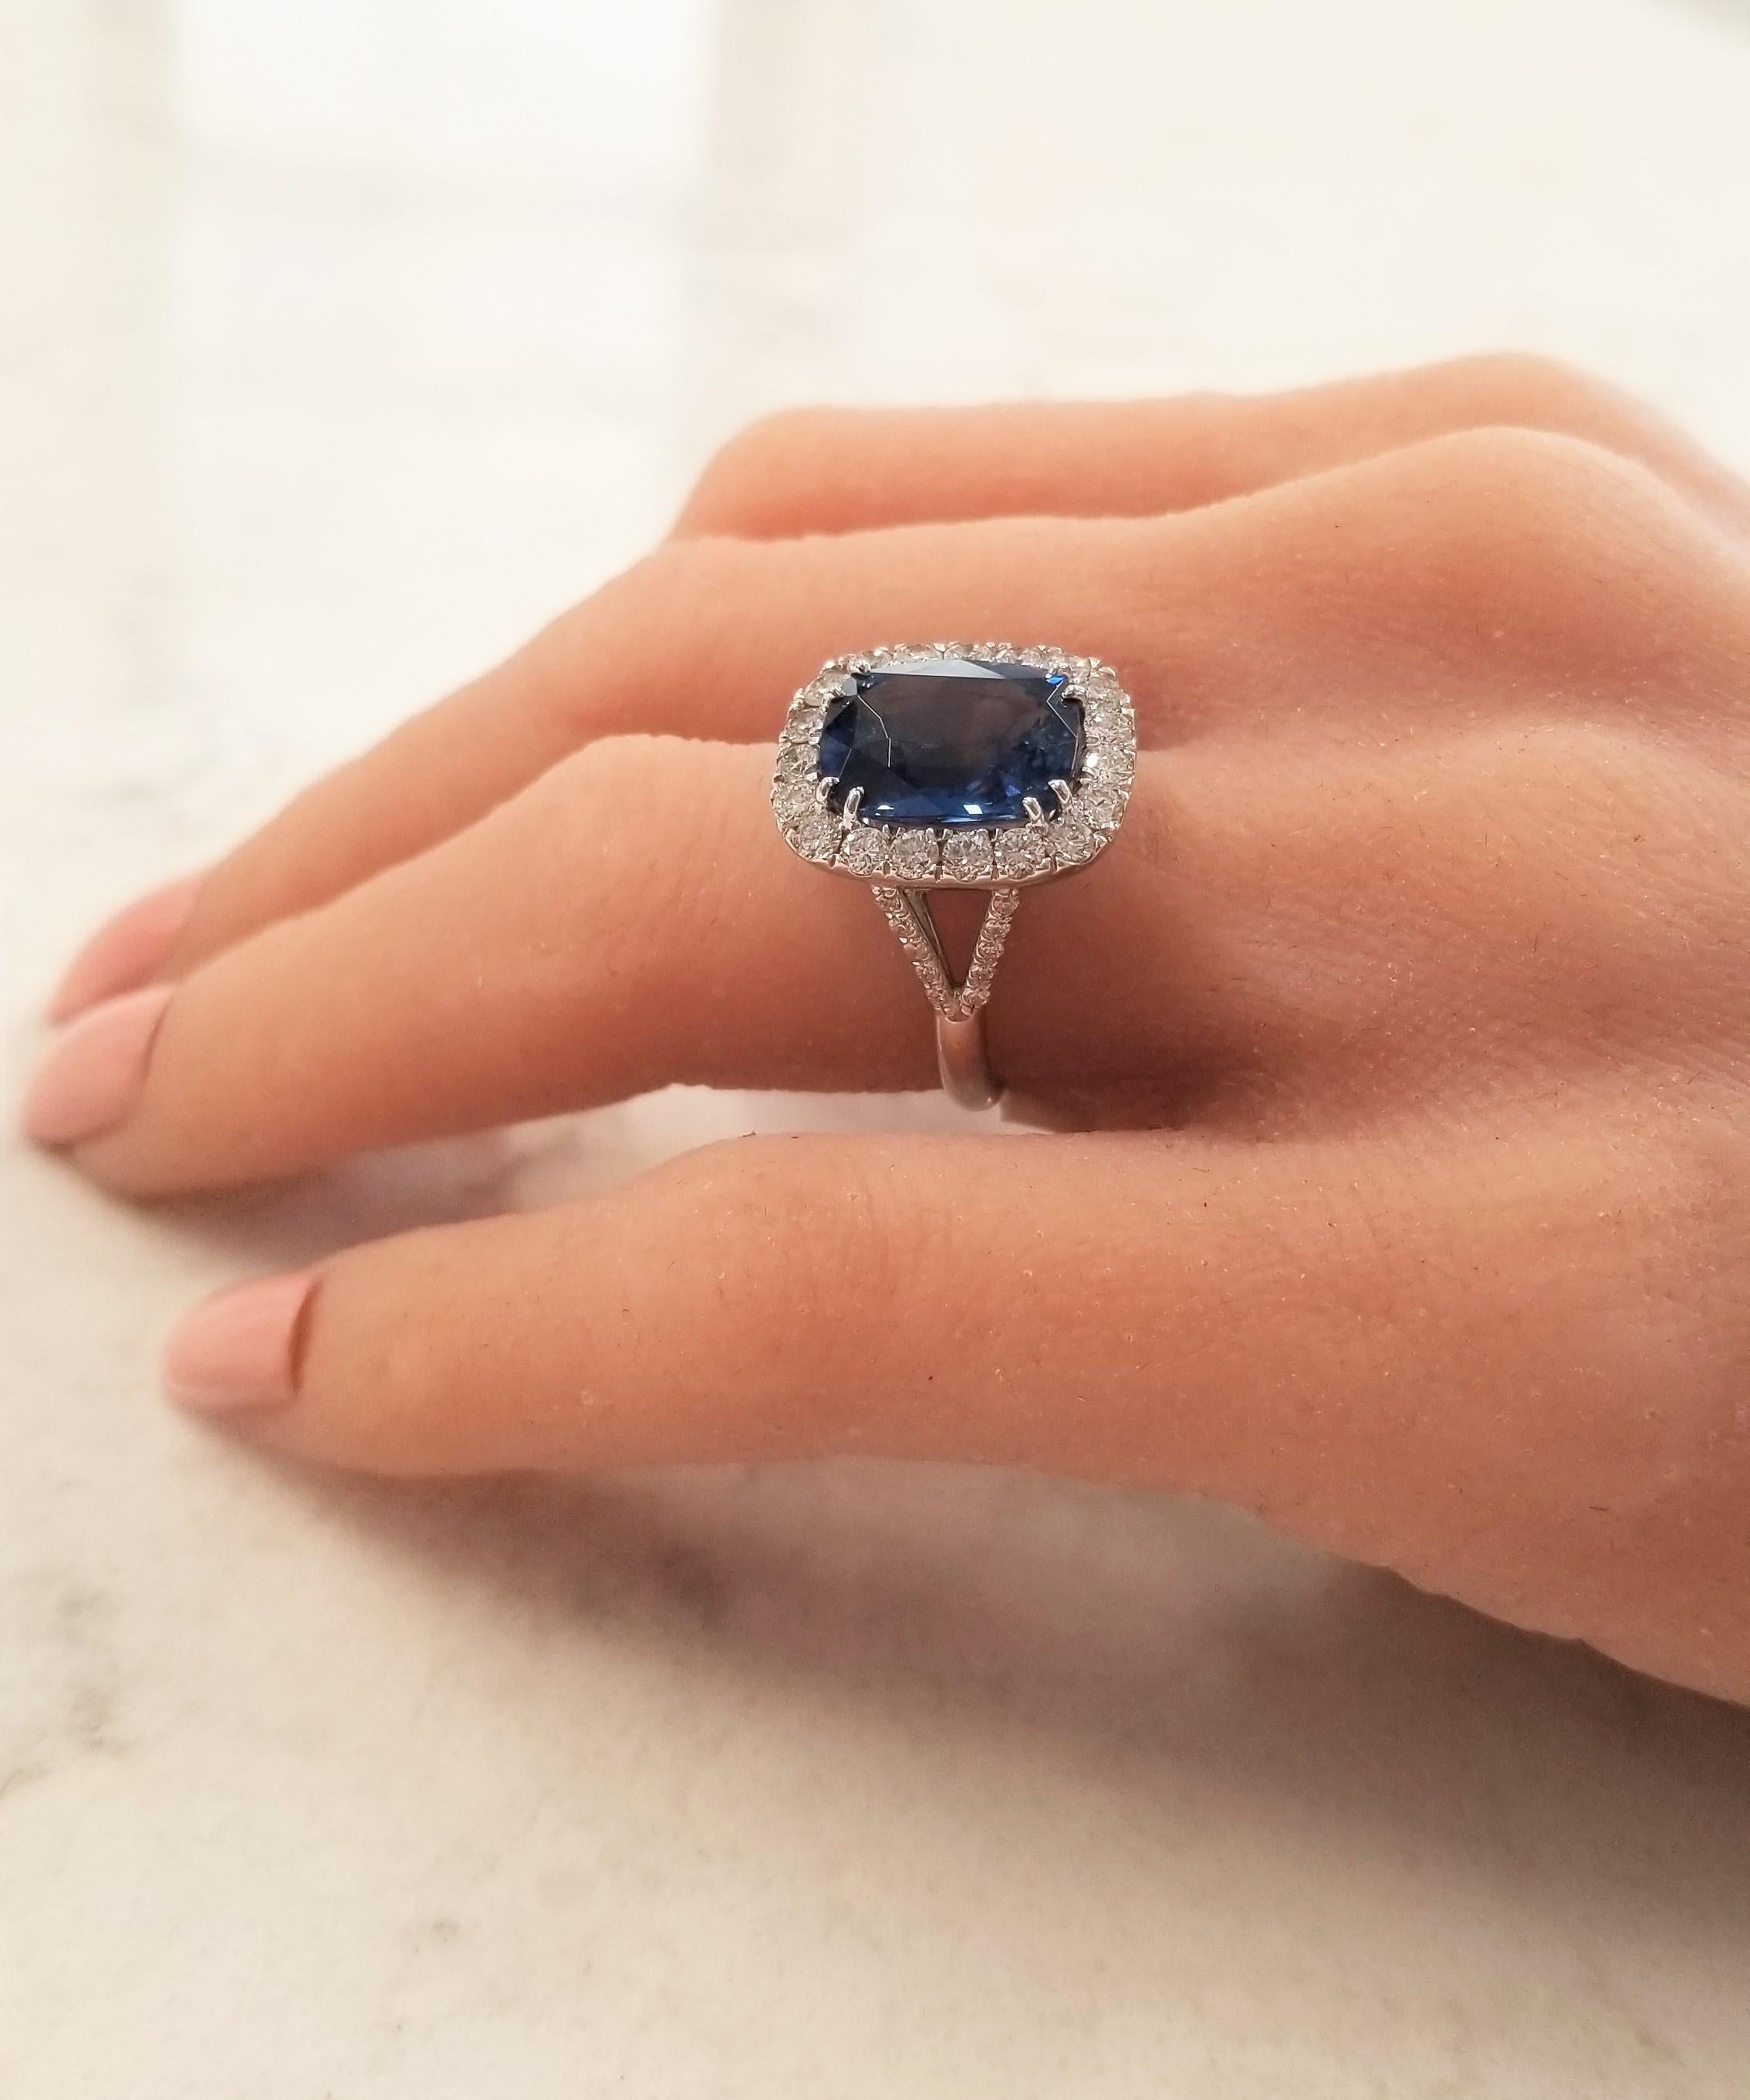 This is a 7.16 carat natural royal blue oval sapphire that measures 12.31 x 9.80mm. The gem source is Sri Lanka; the saturation is what you want with excellent transparency and luster. Large round brilliant cut white diamonds frame this sapphire